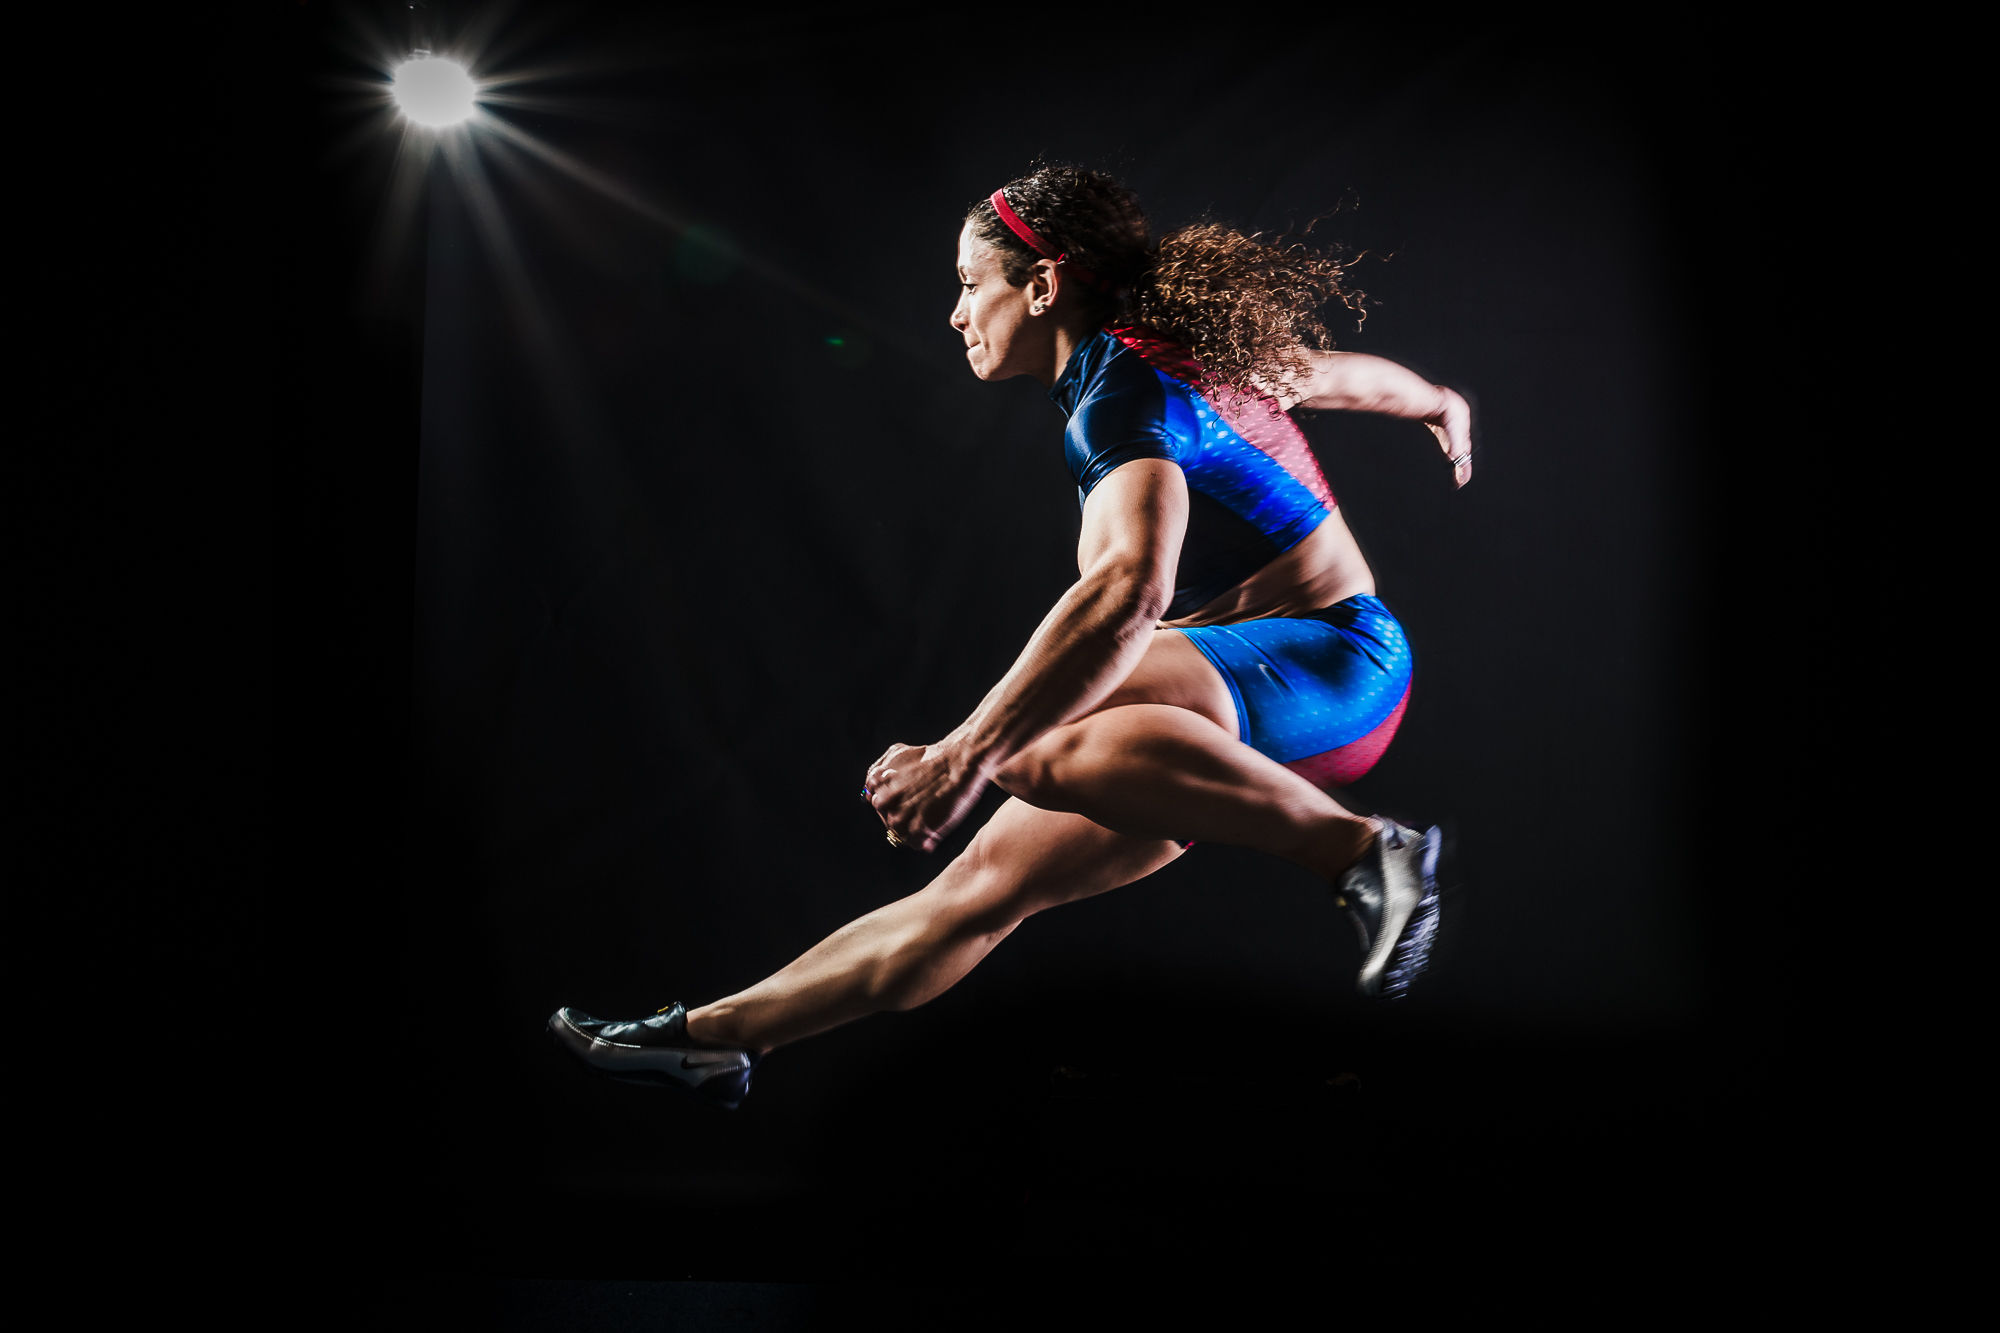 Sports photography, athlete portraits. Photo copyright Miceli Productions. http://MiceliProductions.com